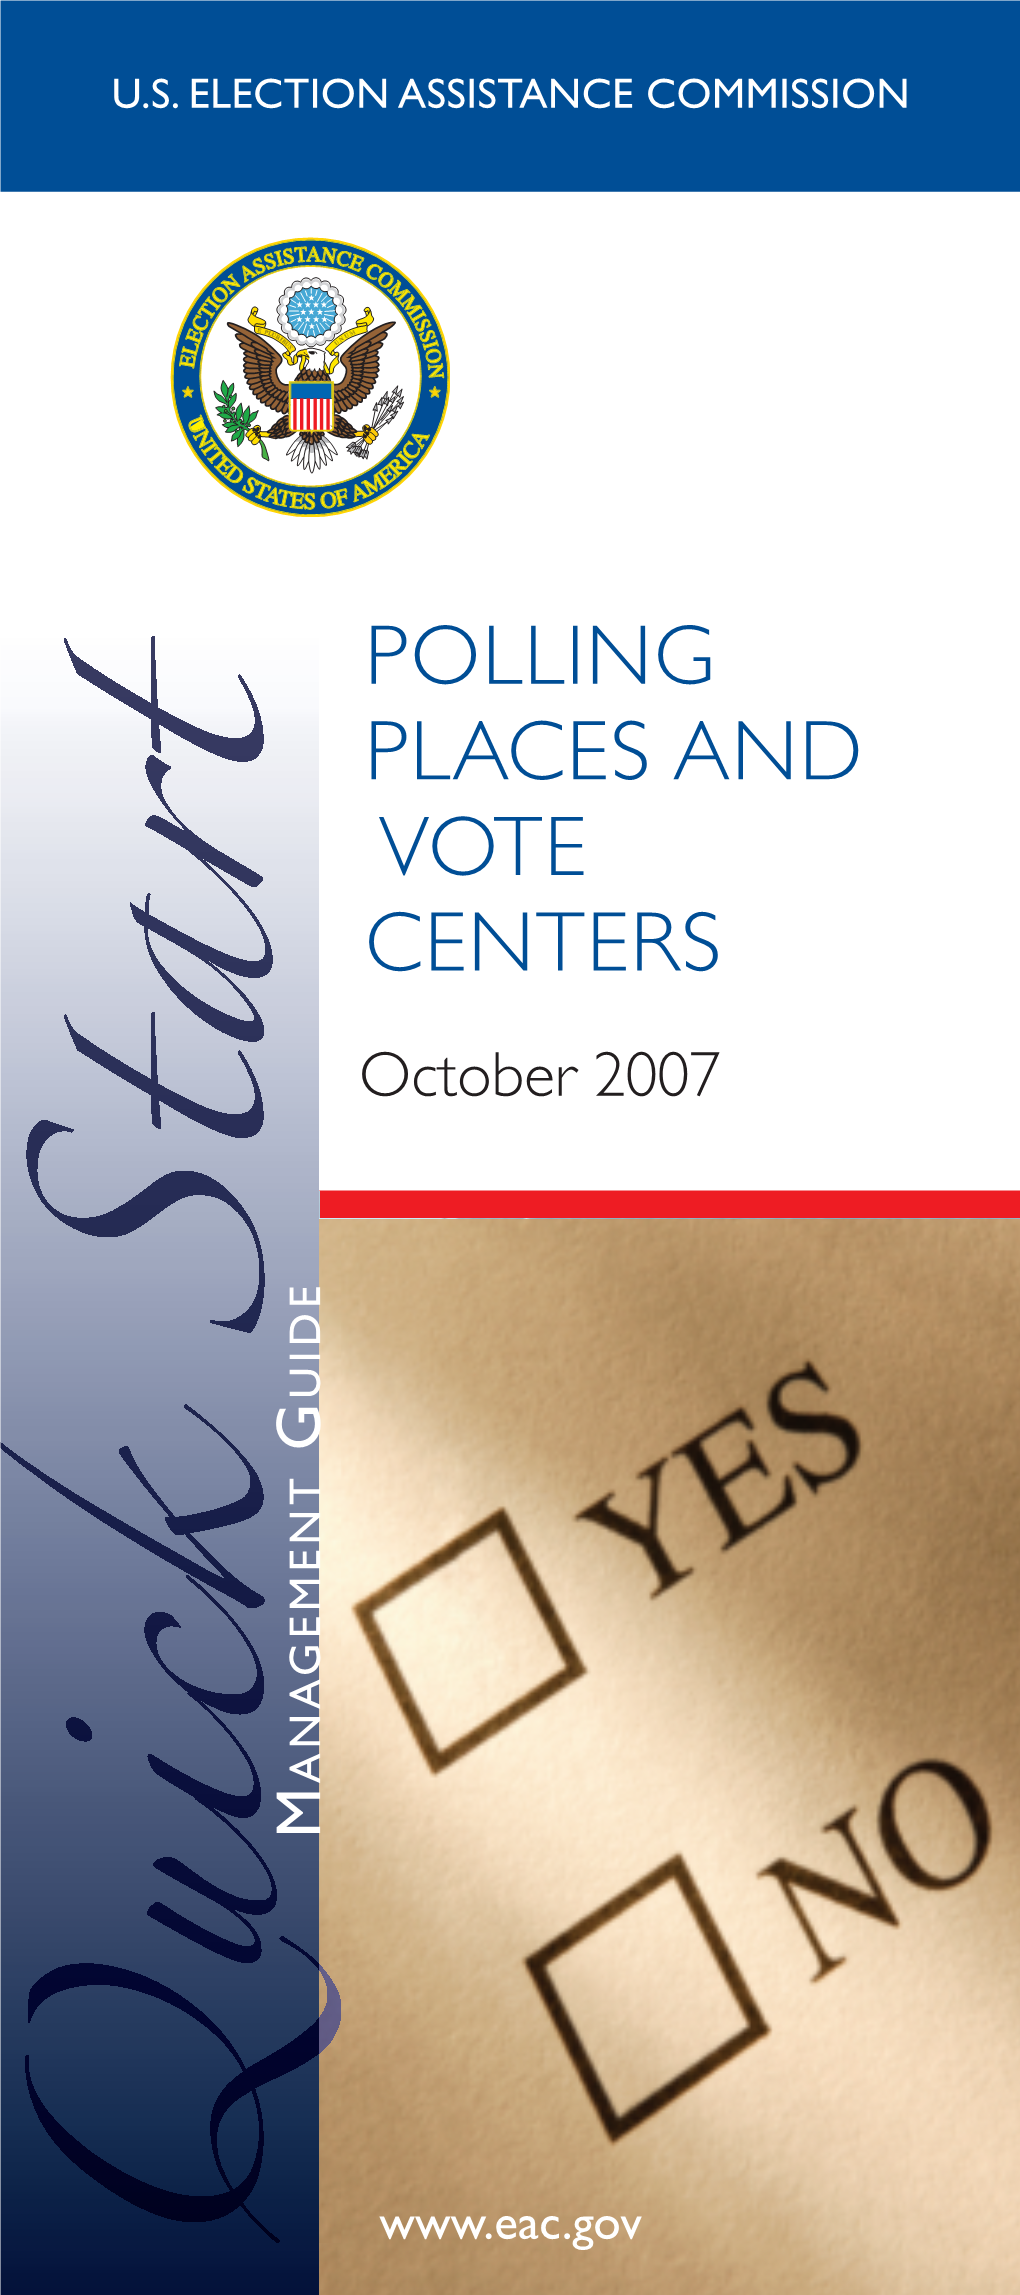 Polling Places and Vote Centers Is Part of a Series of Brochures Designed to Highlight and Summarize